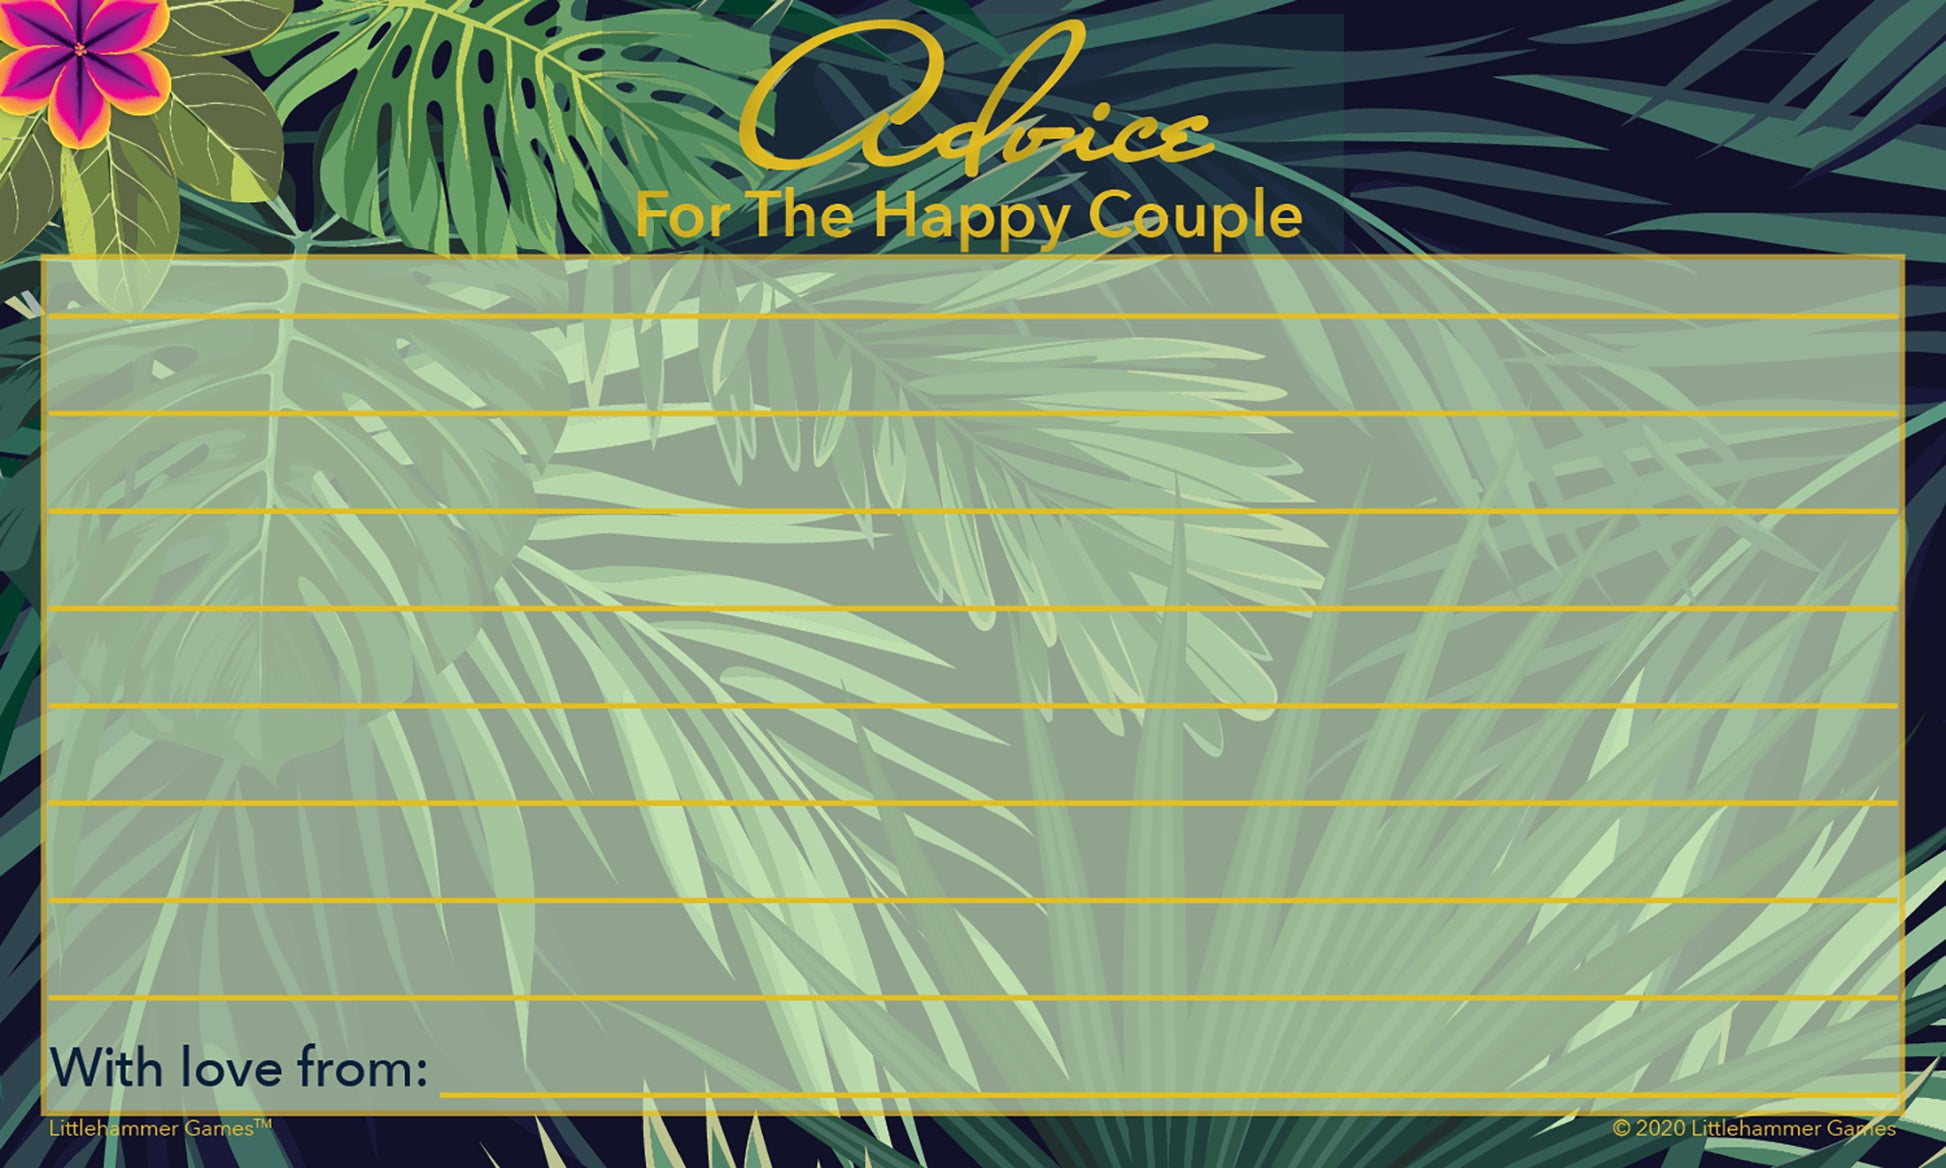 Tropical-themed Advice for the Happy Couple cards